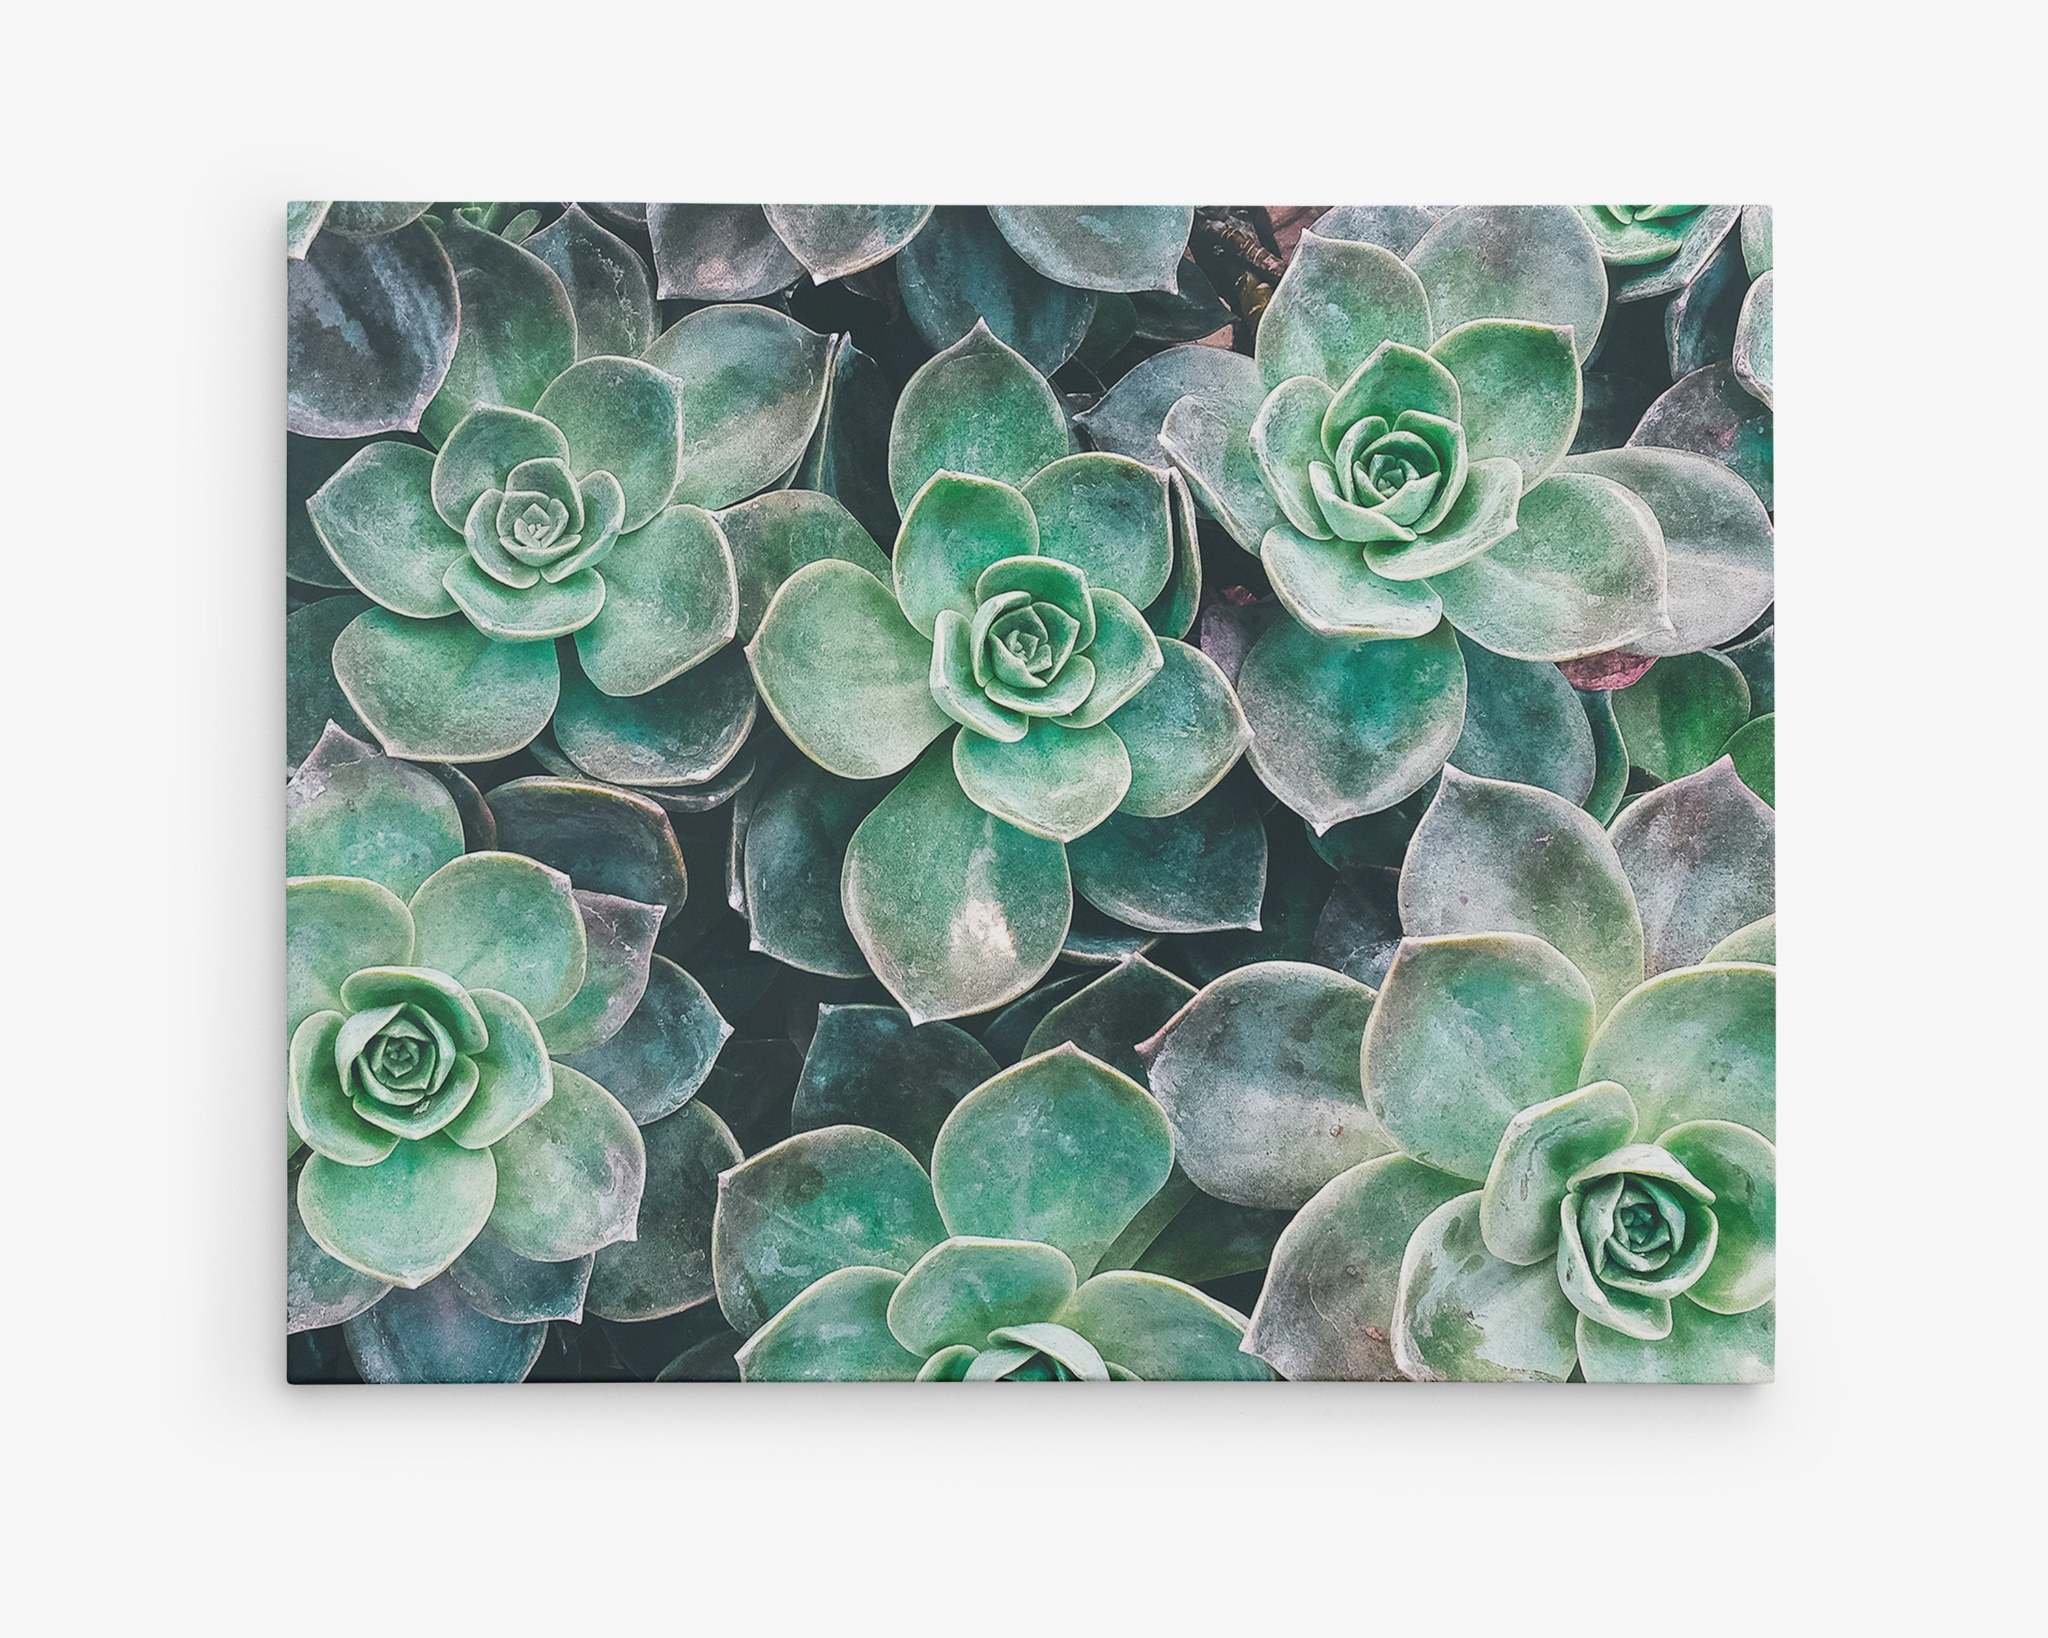 A close-up image of green succulent plants with thick, fleshy leaves arranged in a rosette pattern. The leaves have a gradient of colors, from light green in the center to darker green on the edges. This botanical print would look stunning as Fresh Green Succulent Canvas Wall Art, 'Bed of Succulents' by Offley Green, perfect for adding nature's beauty to any space. The background is filled with overlapping succulent plants.